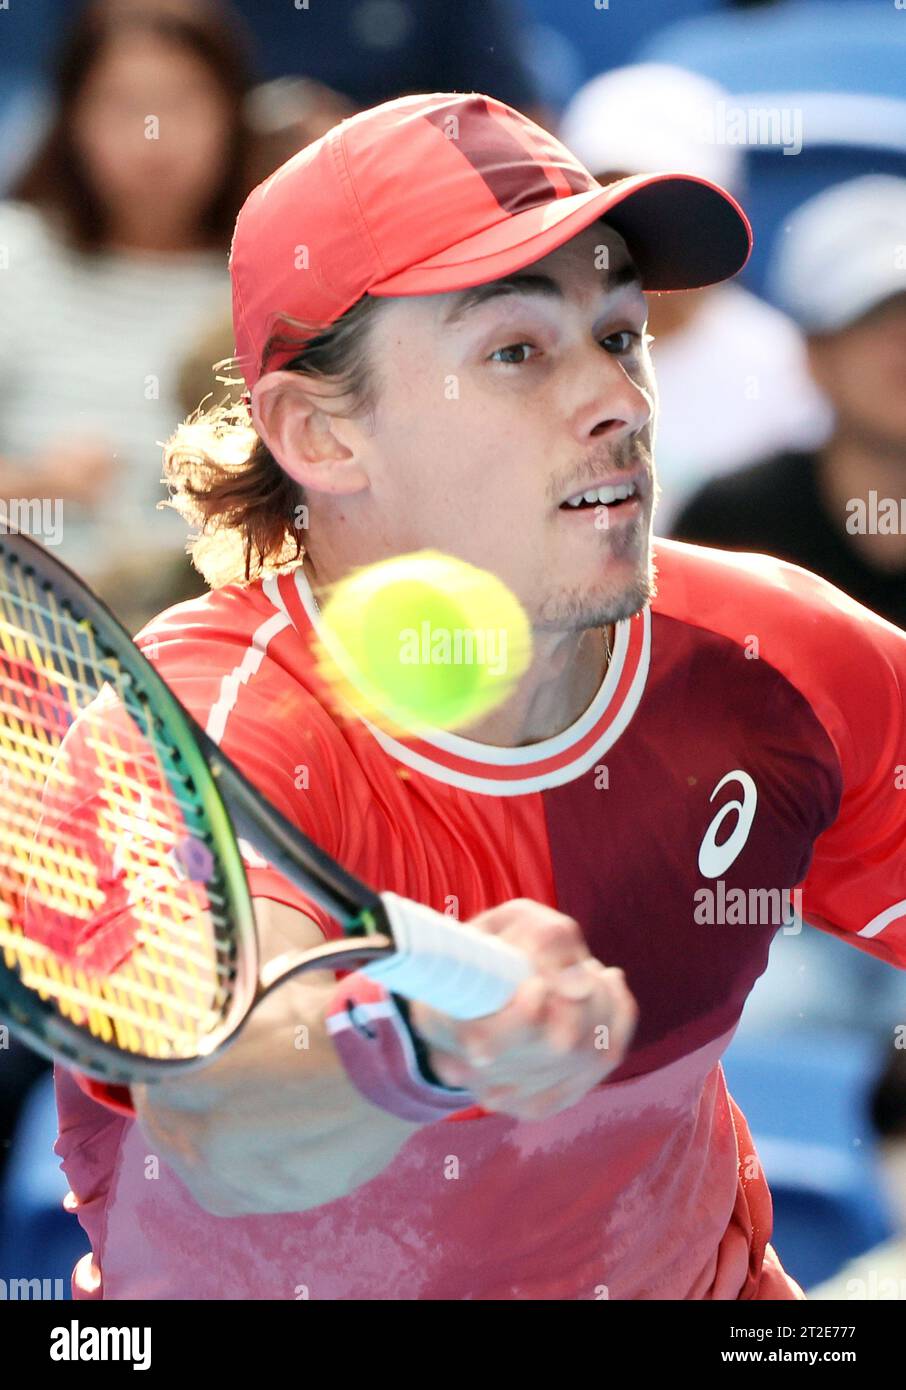 Kubler and De Minaur eliminated in Italian Open quarterfinals, 17 May, 2023, All News, News and Features, News and Events